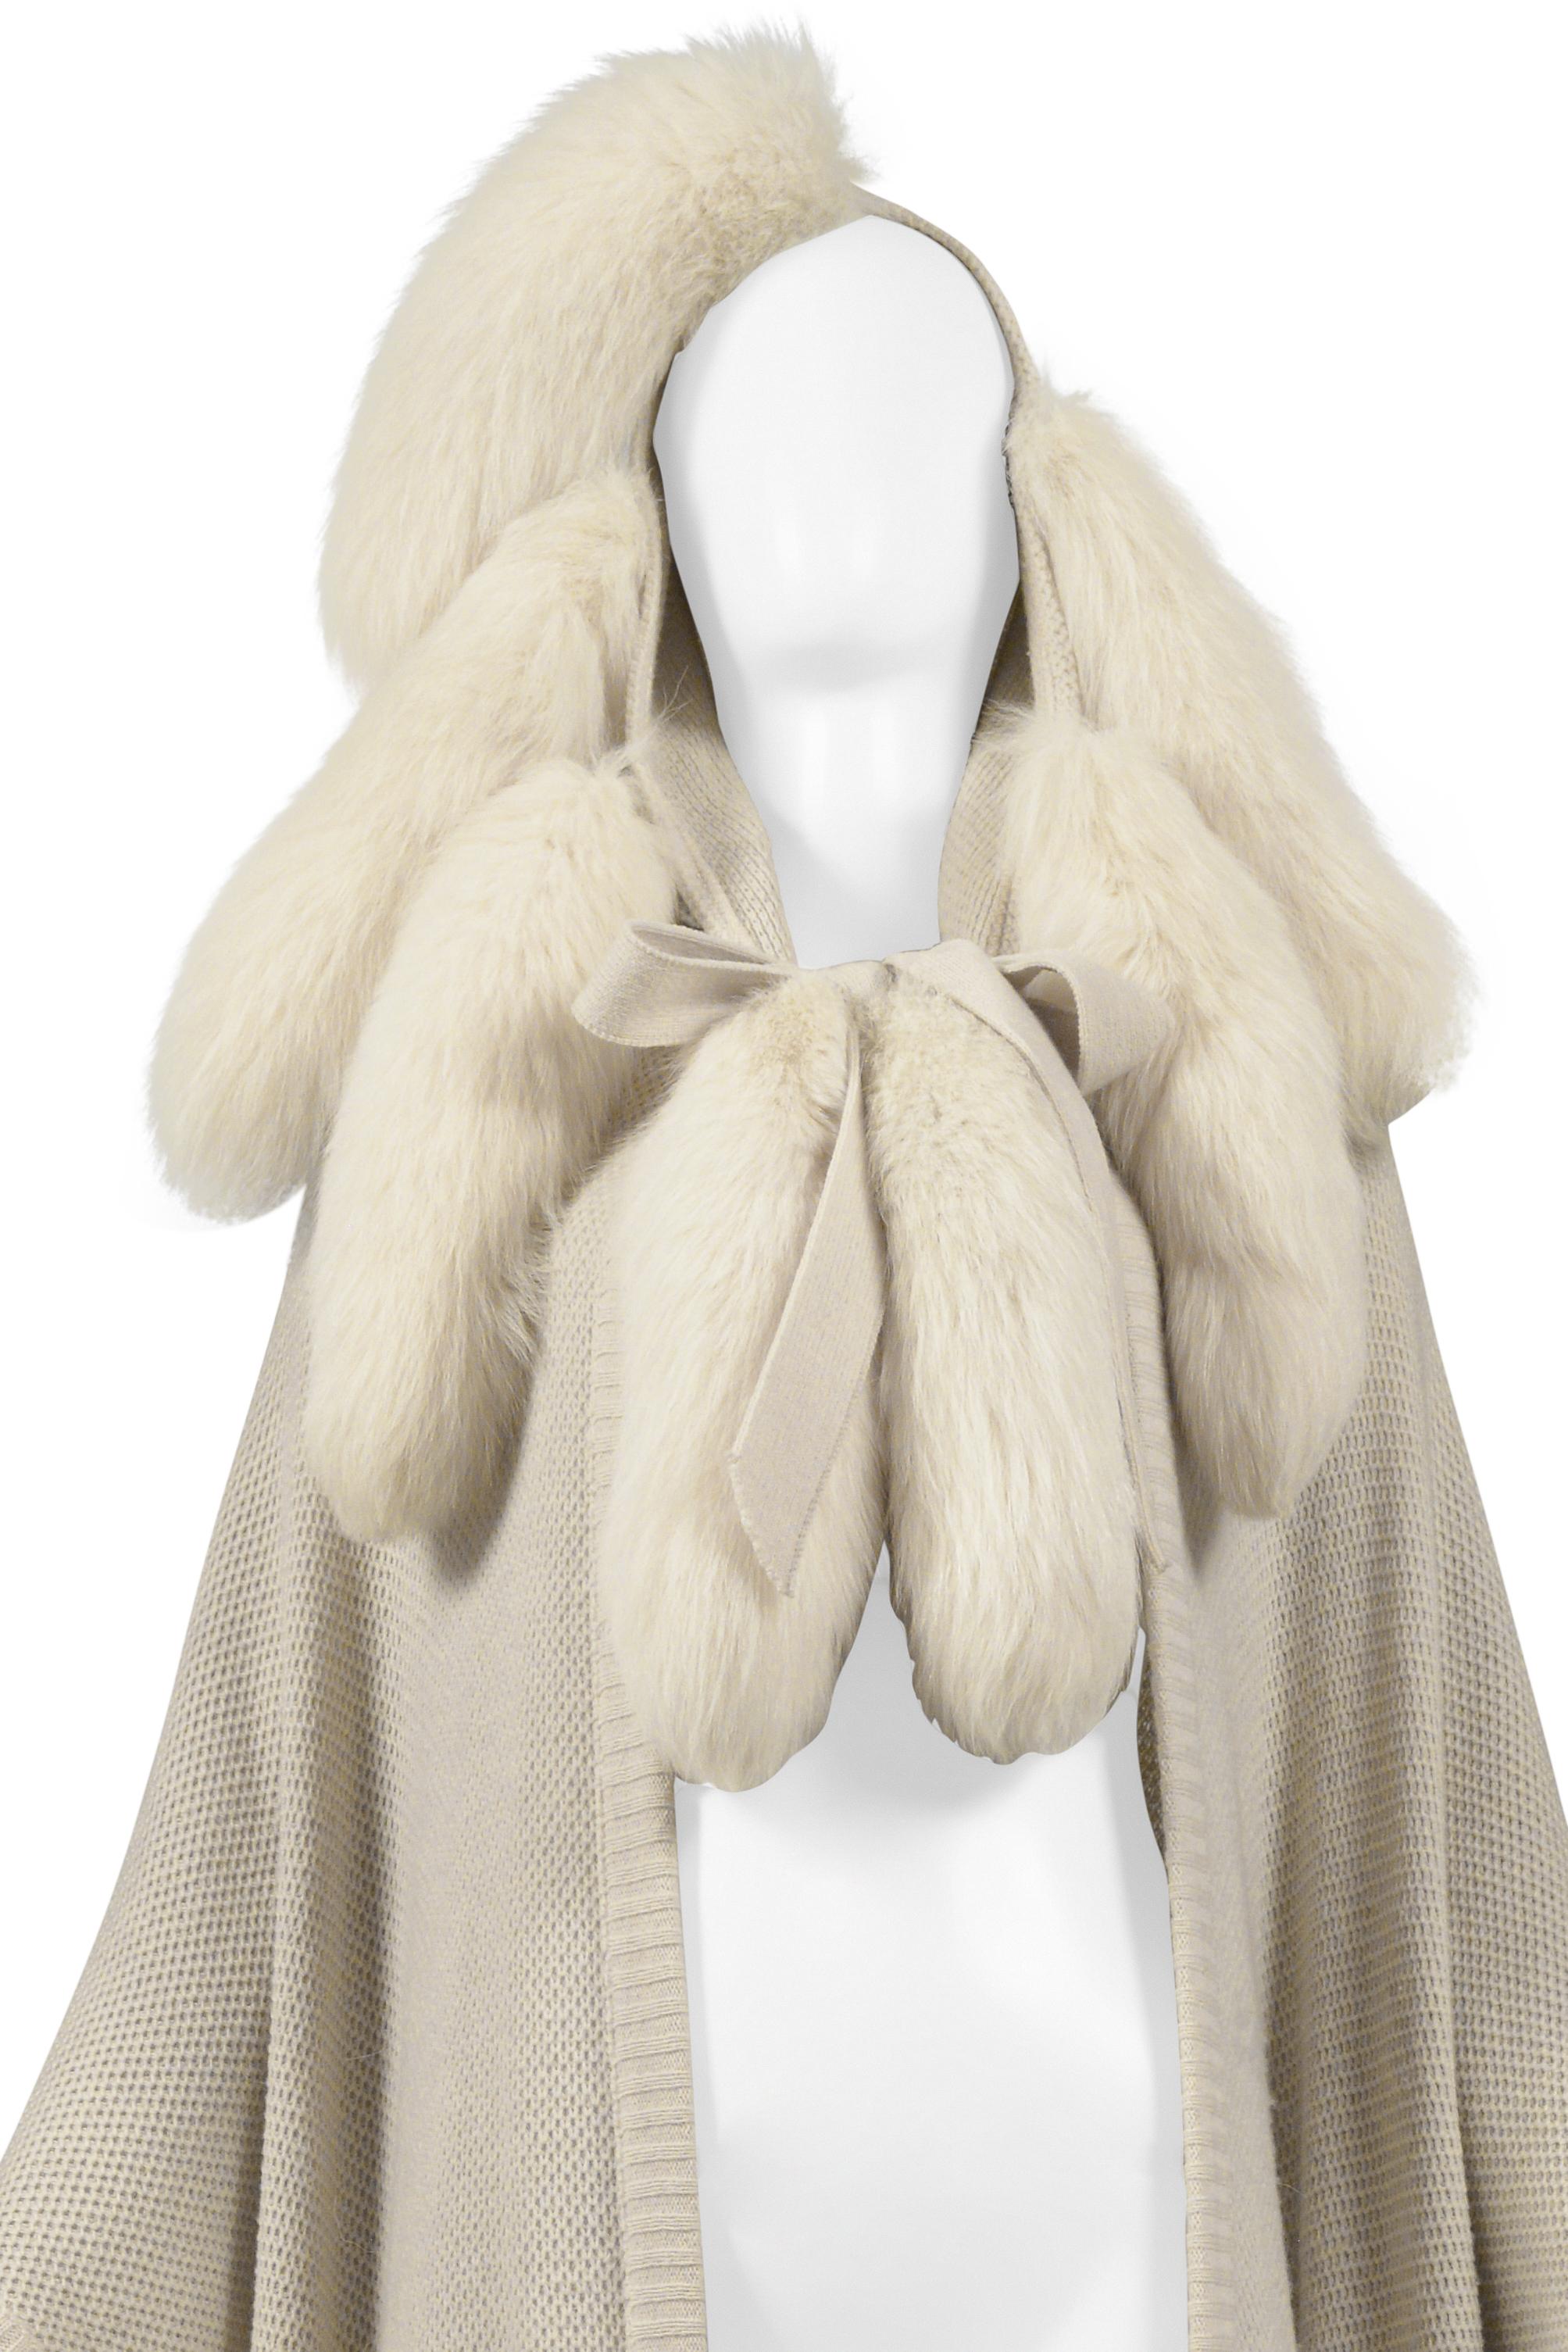 Alimia Paris Off-White Cape With Fur Tails & Leather Patches For Sale 3